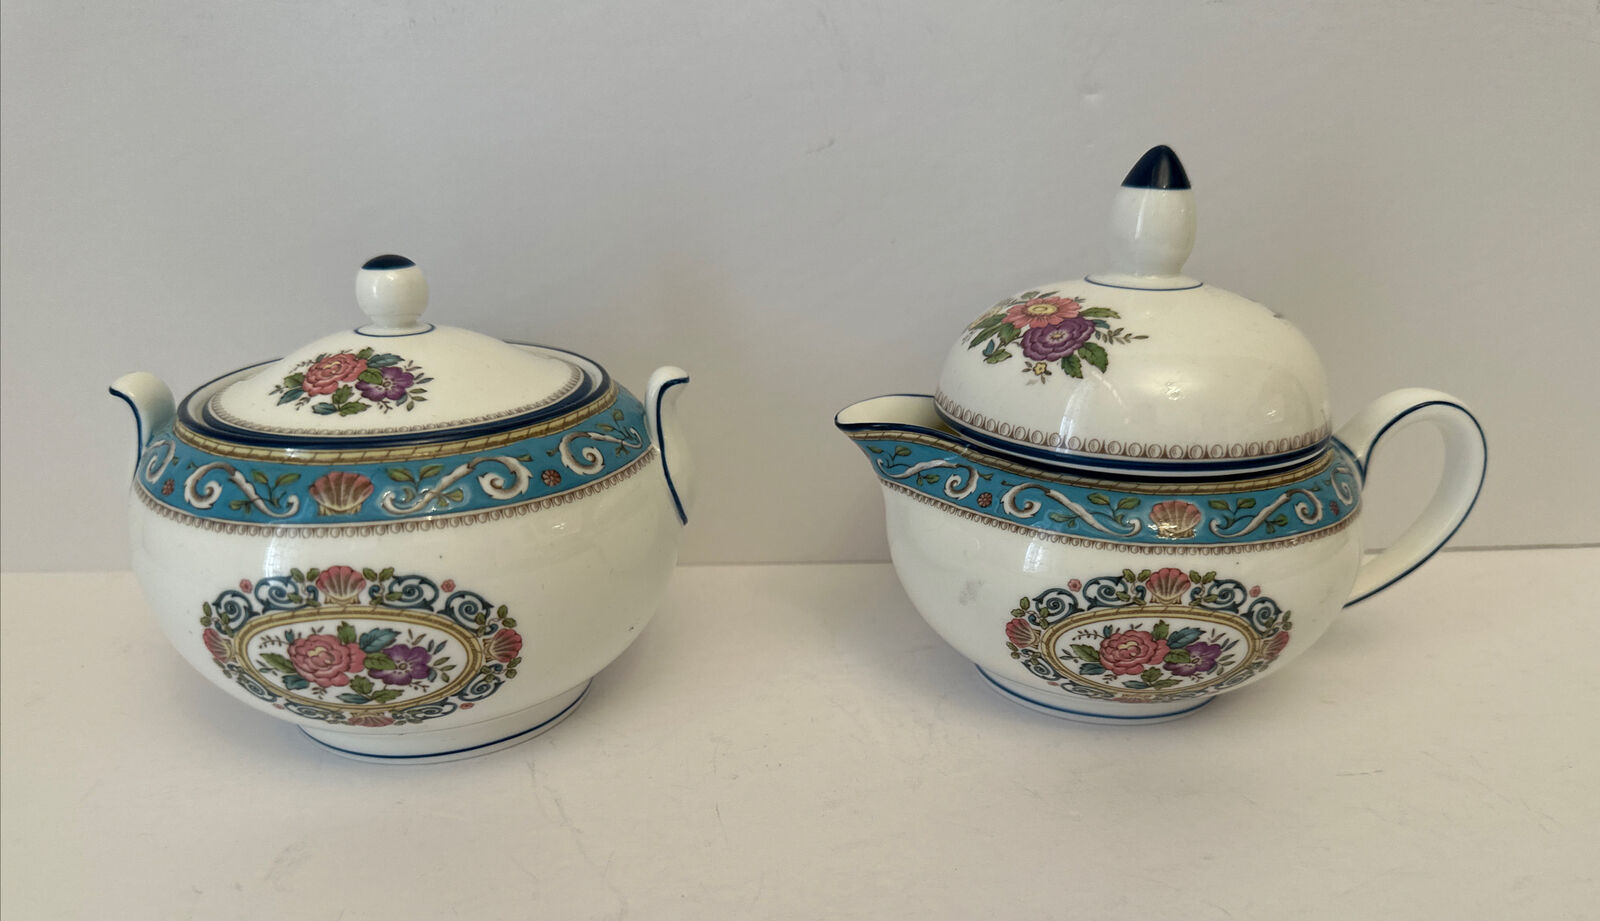 RUNNYMEDE Set by Wedgwood Covered Sugar Bowl/Covered Creamer, 2pc England - RARE